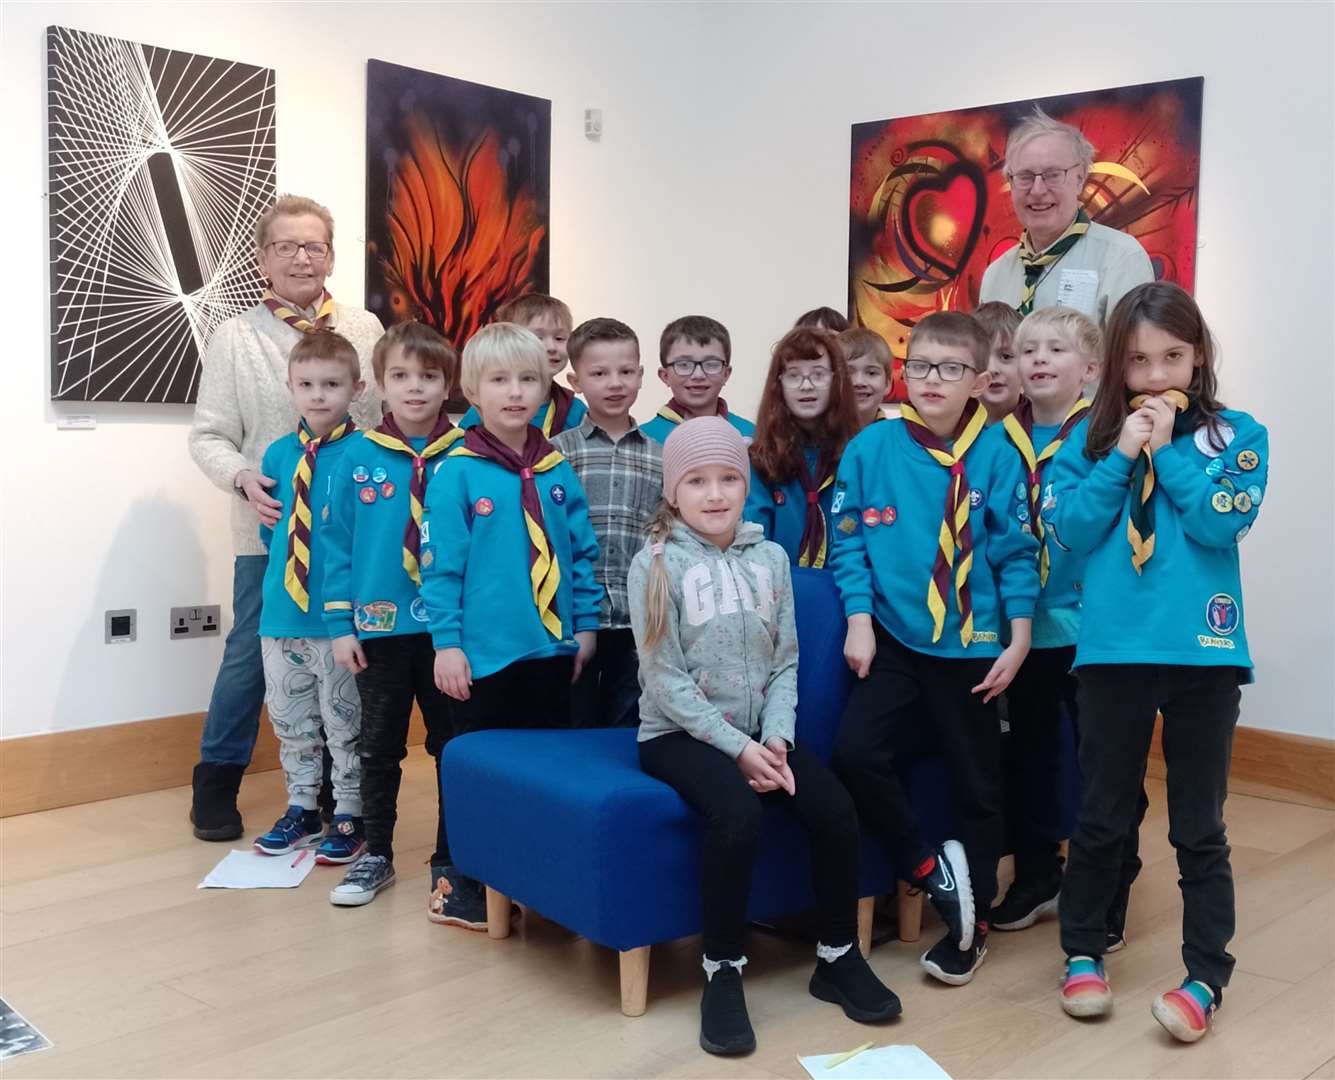 Beavers at North Coast Visitor Centre art exhibition 'Change' with leaders Sandra Carson and Ian Pearson.